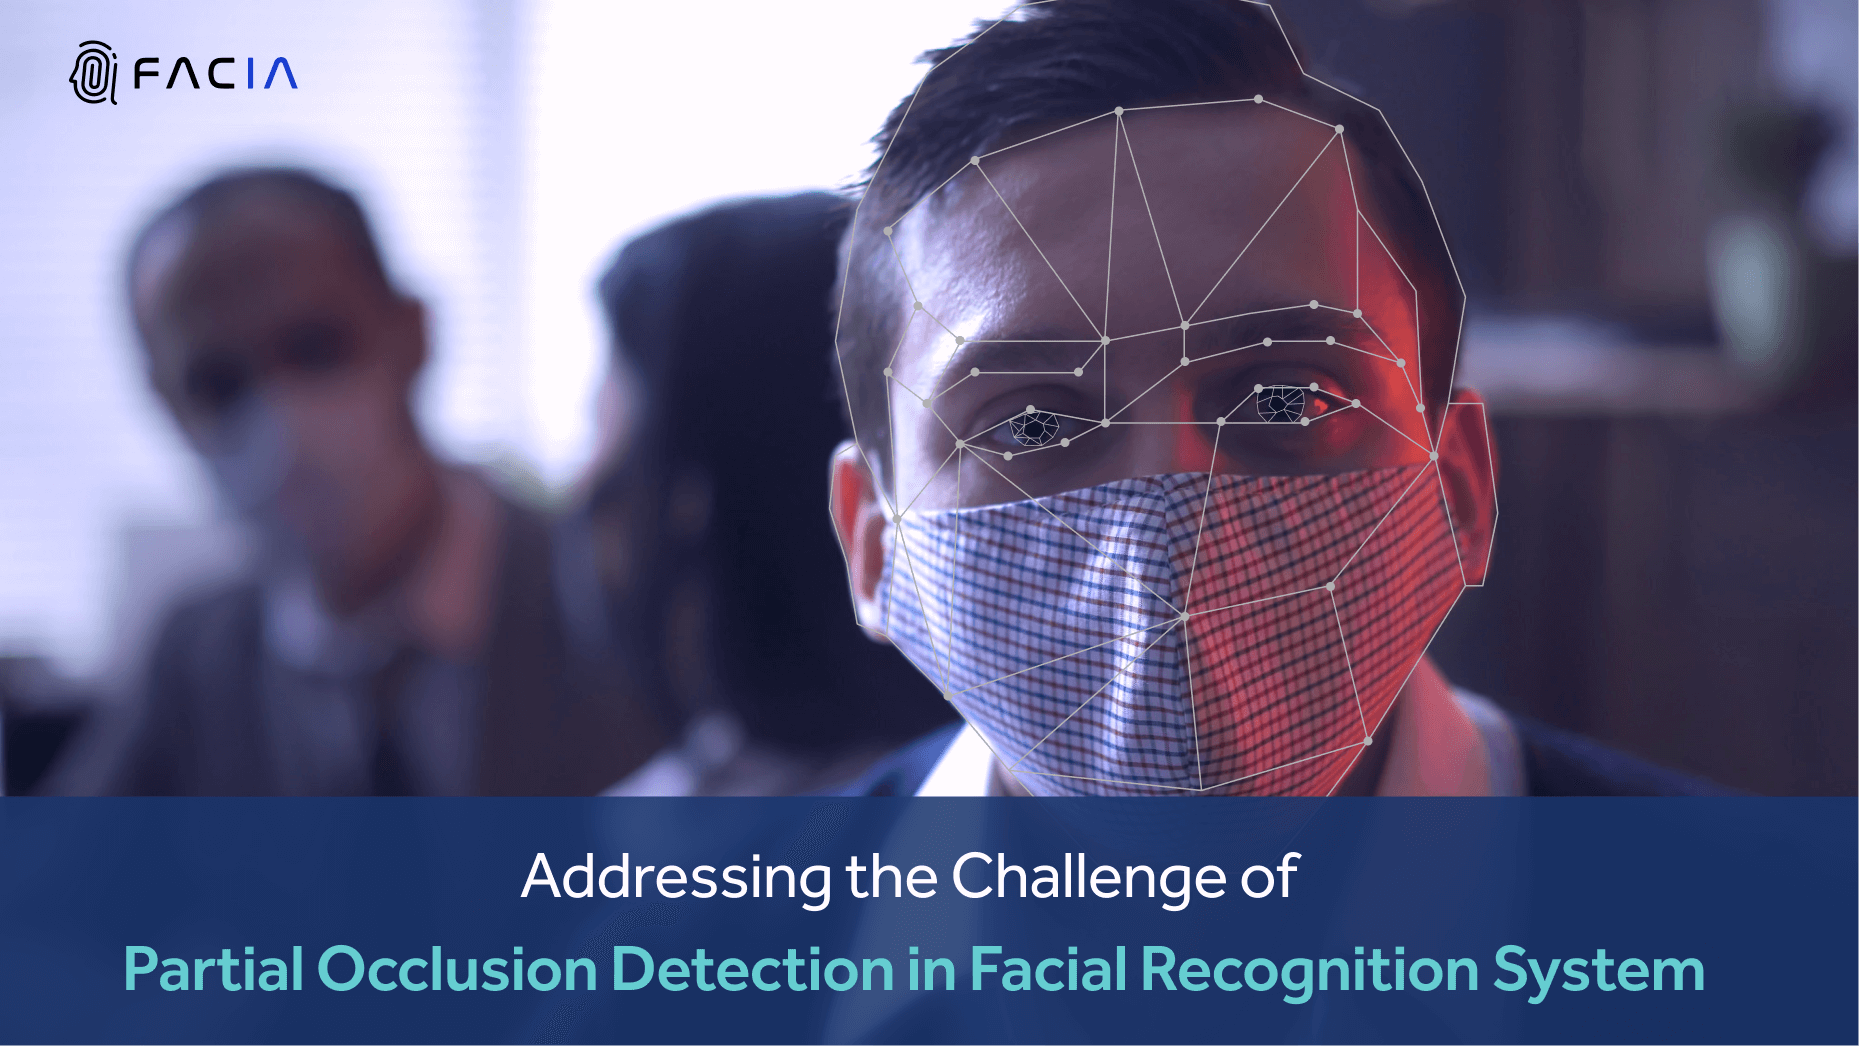 Addressing the Challenge of Partial Occlusion Detection in Facial Recognition System